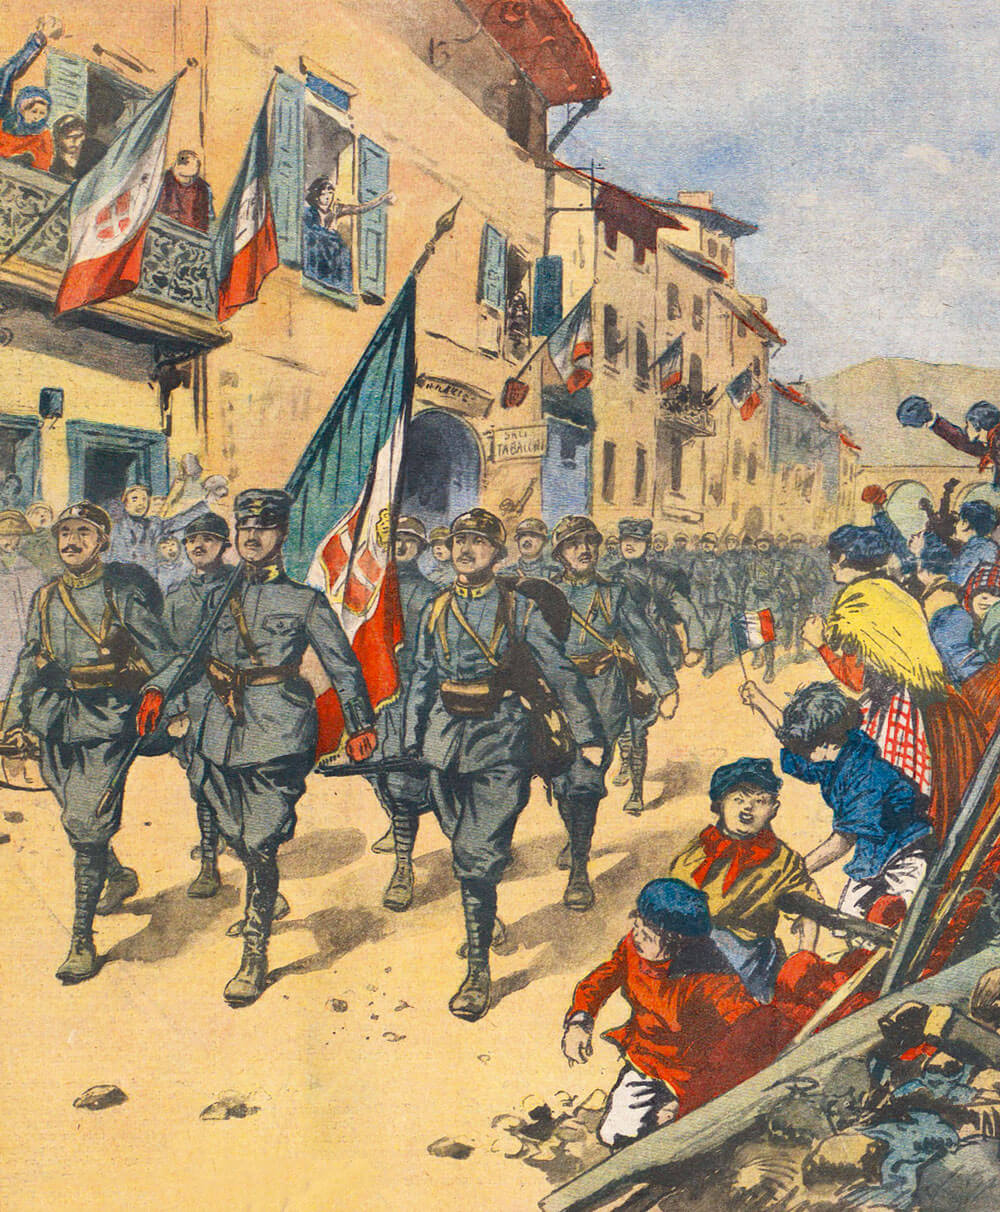 An illustration from Le Petit Journal, 9th of January nineteen twenty-one, of Italian troops entering Fiume after D’Annunzio’s defeat in December nineteen twenty. This image was captioned “The end of the adventure.”